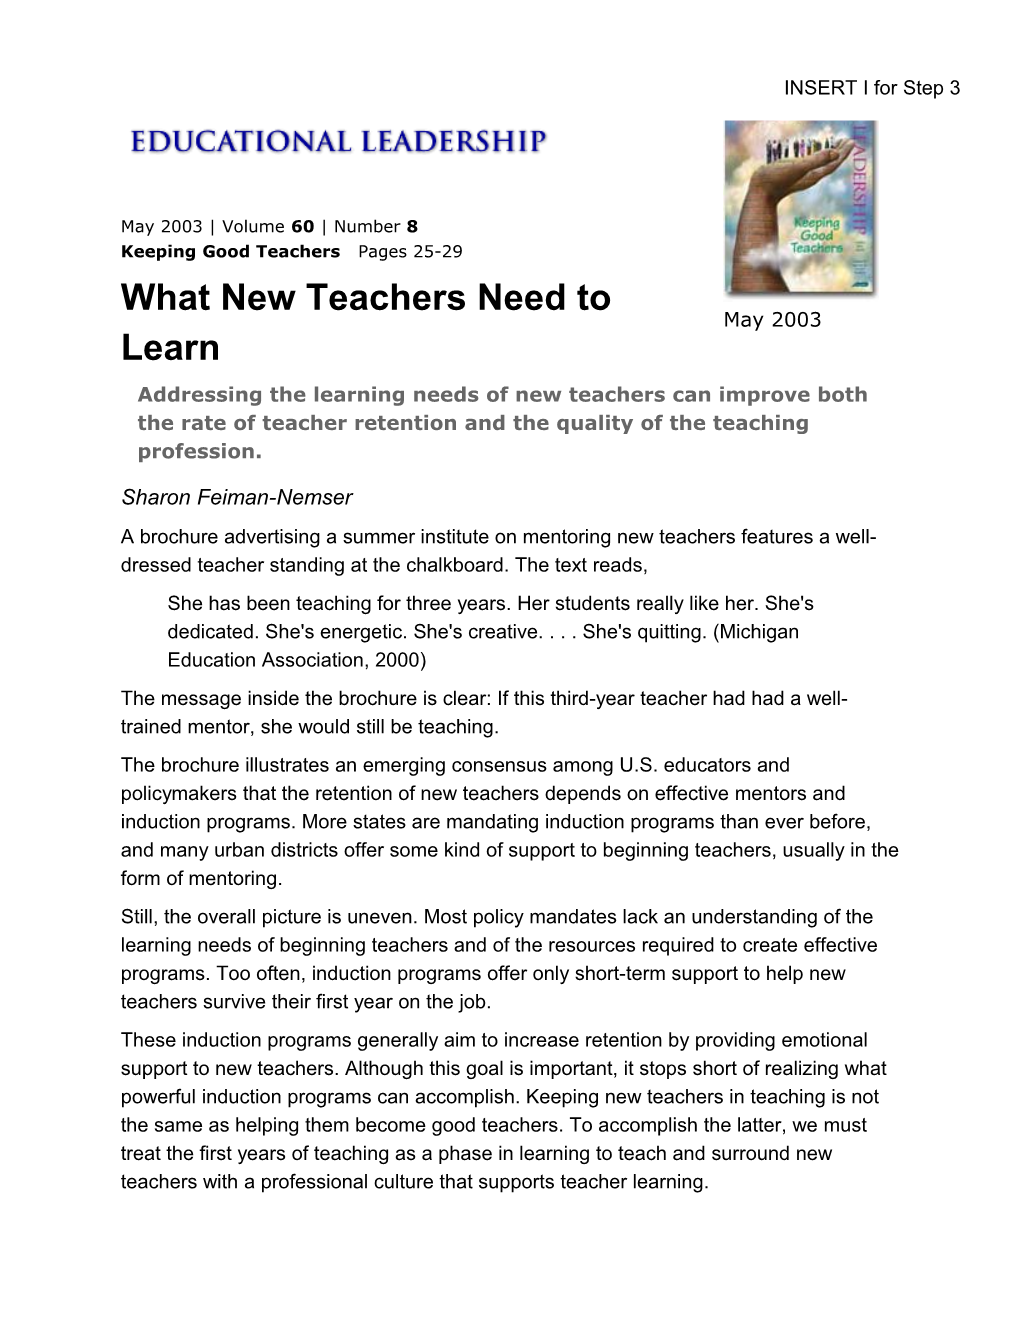 What New Teachers Need to Learn